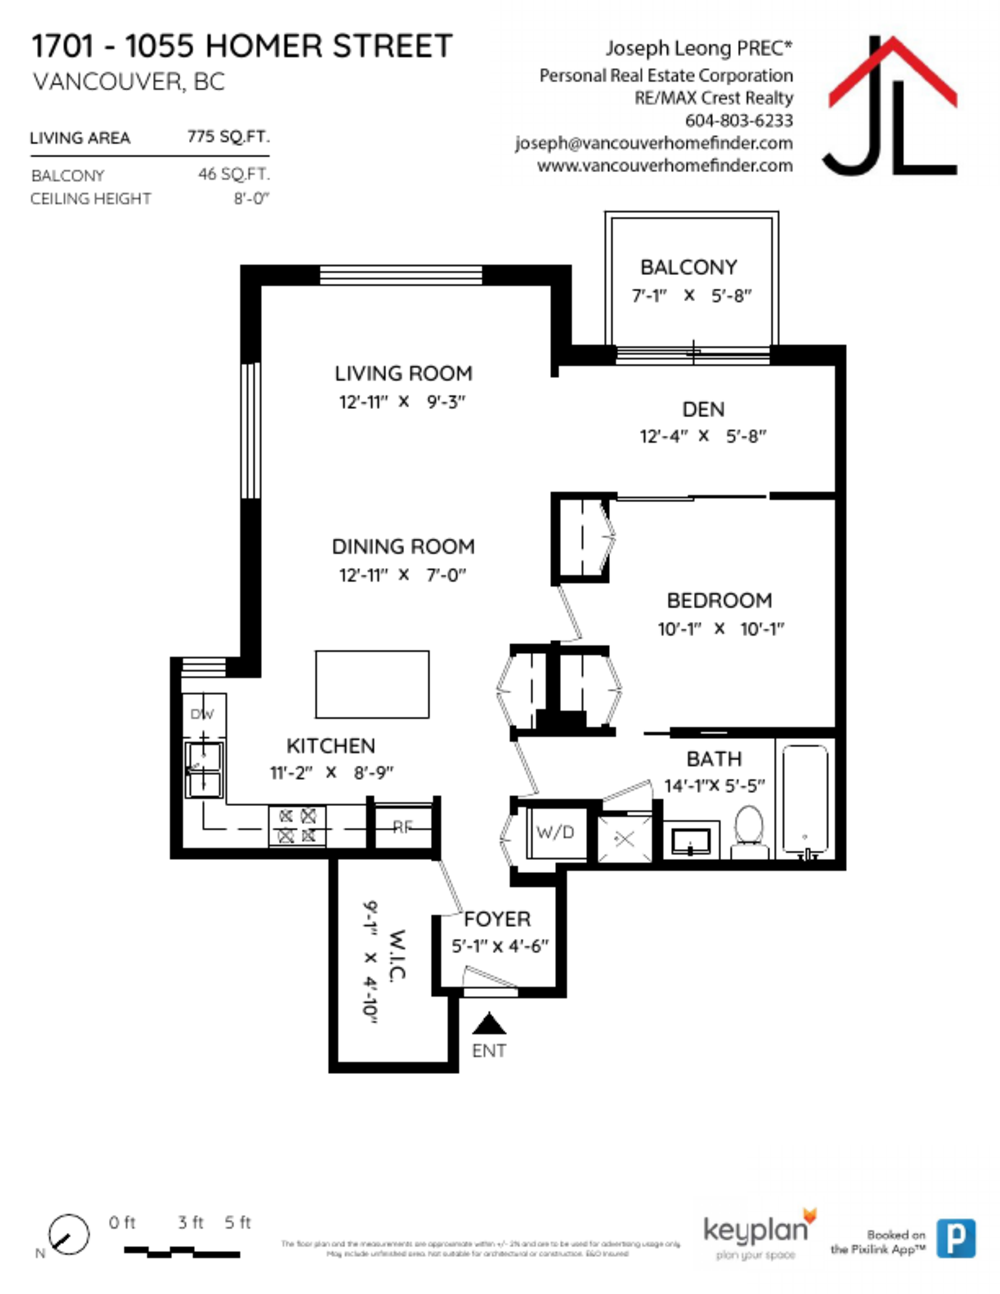 Floor Plan for a 1 Bedroom Apartment in Vancouver